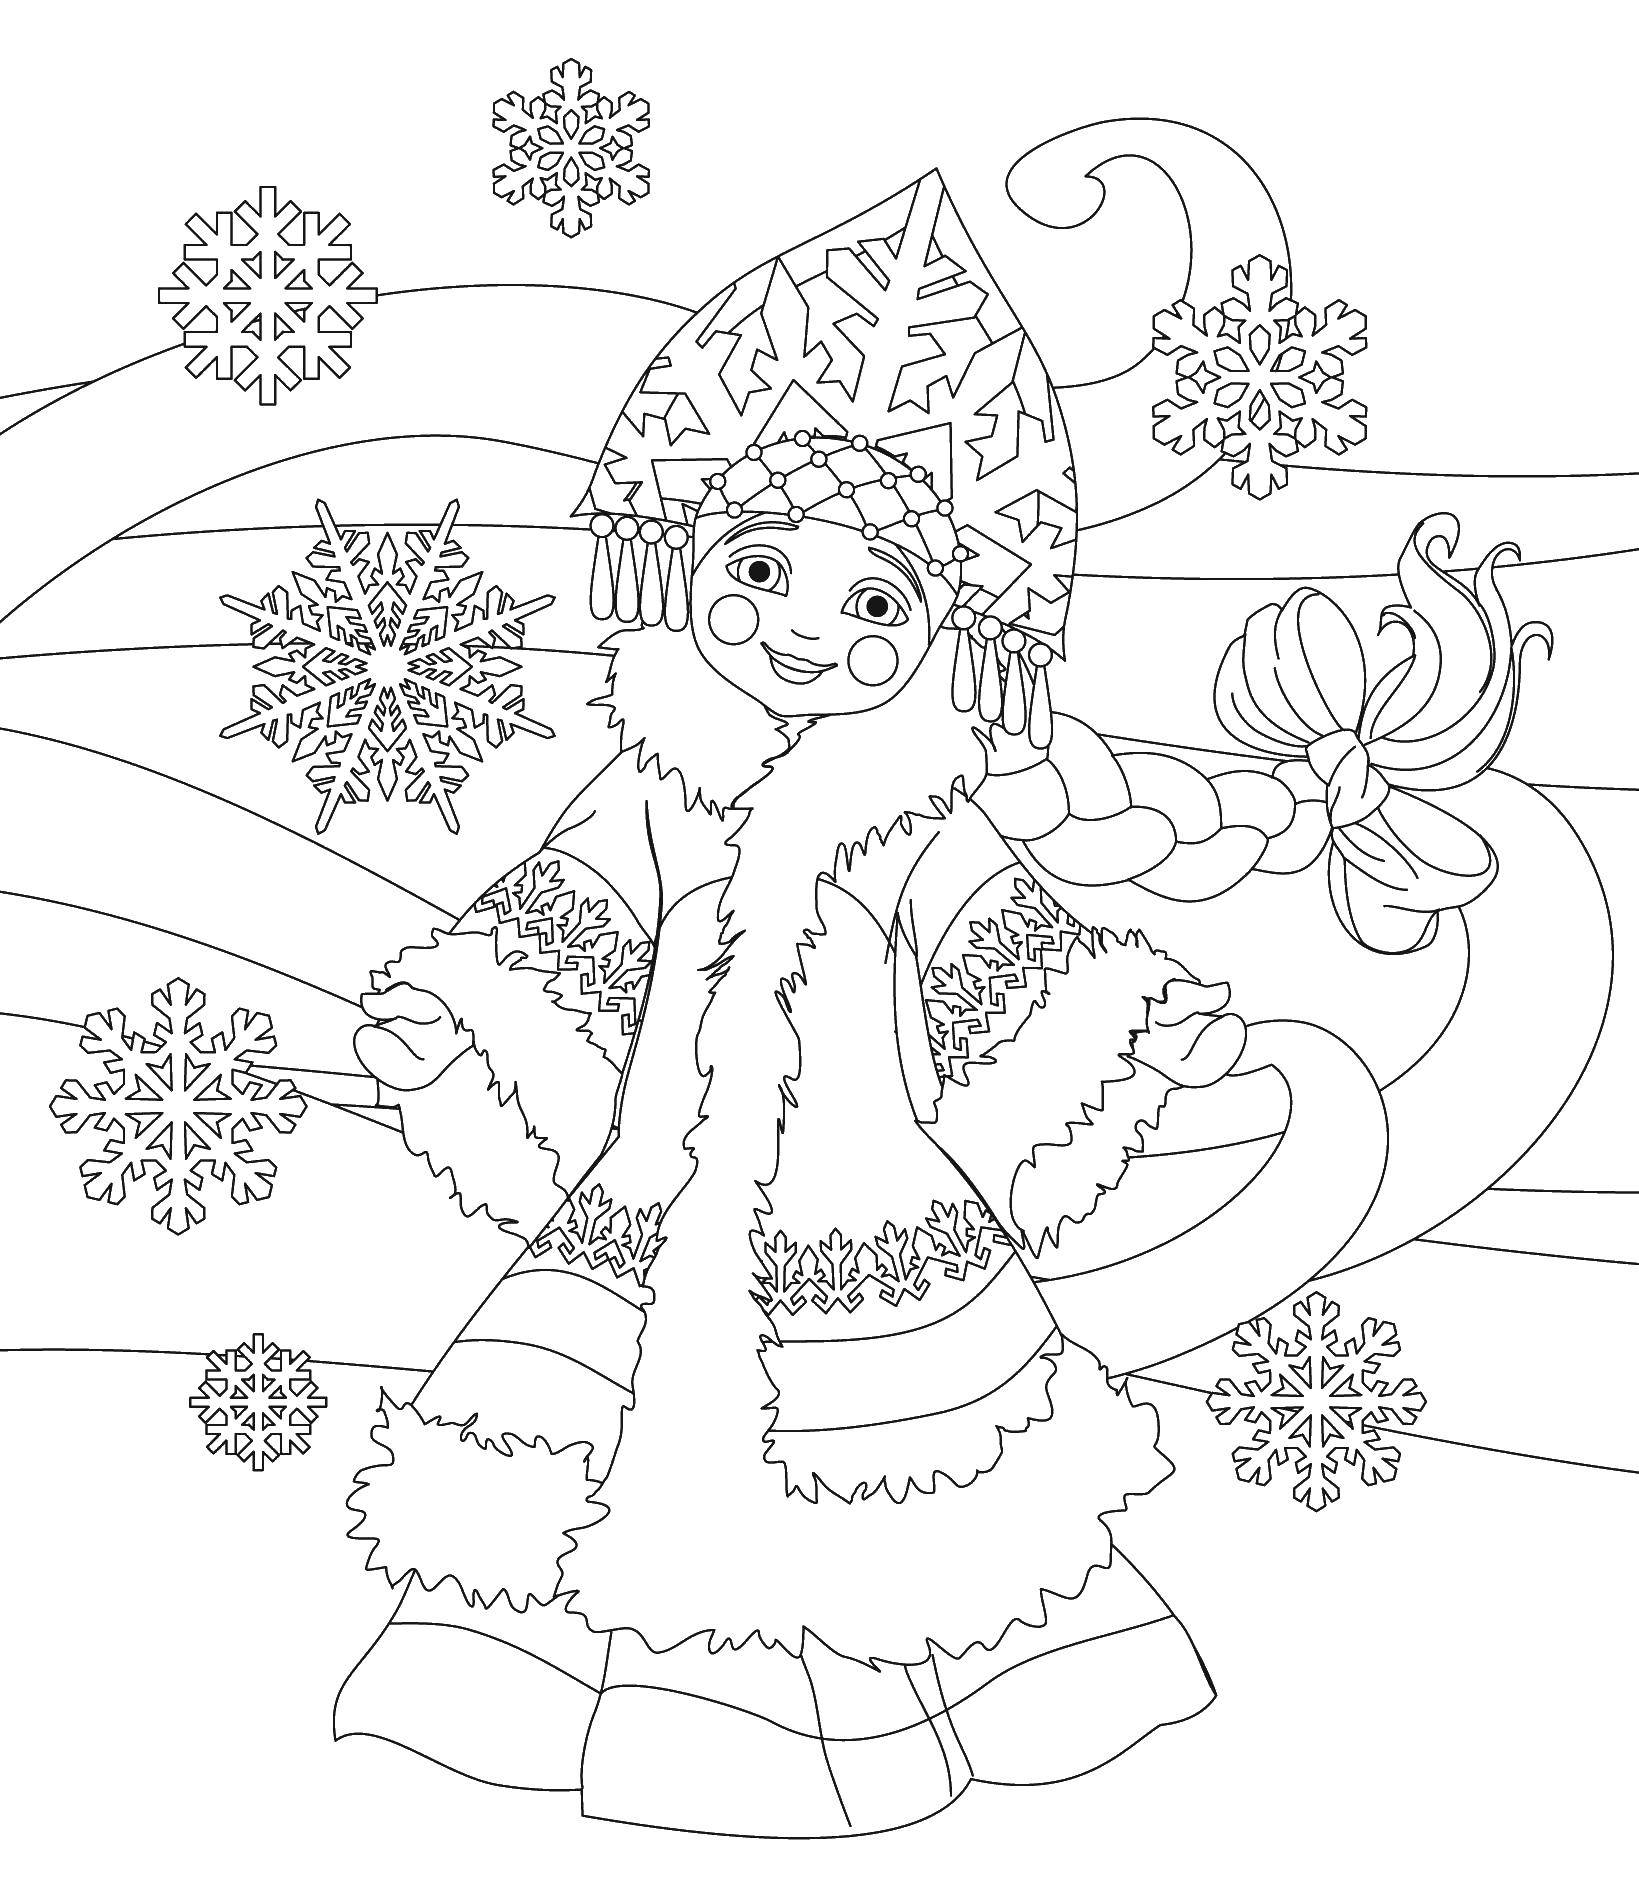 Coloring Snow white and the snowflakes. Category the tale of Snegurochka. Tags:  the snow maiden, snowflakes, headdress.